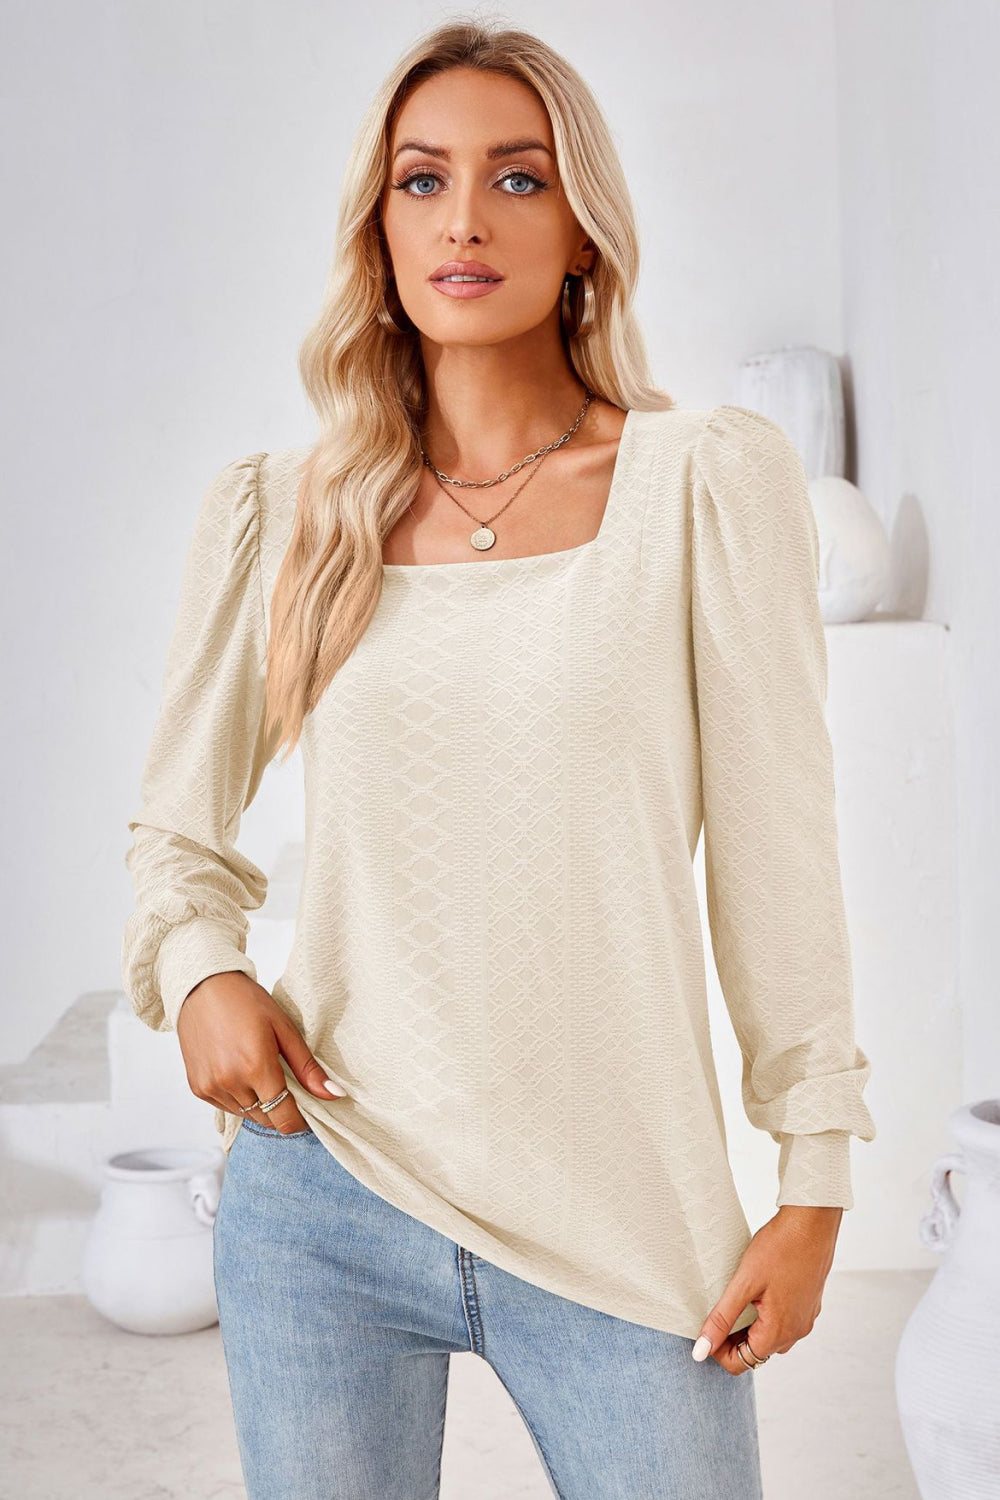 Square Neck Puff Sleeve Blouse - Women’s Clothing & Accessories - Shirts & Tops - 4 - 2024